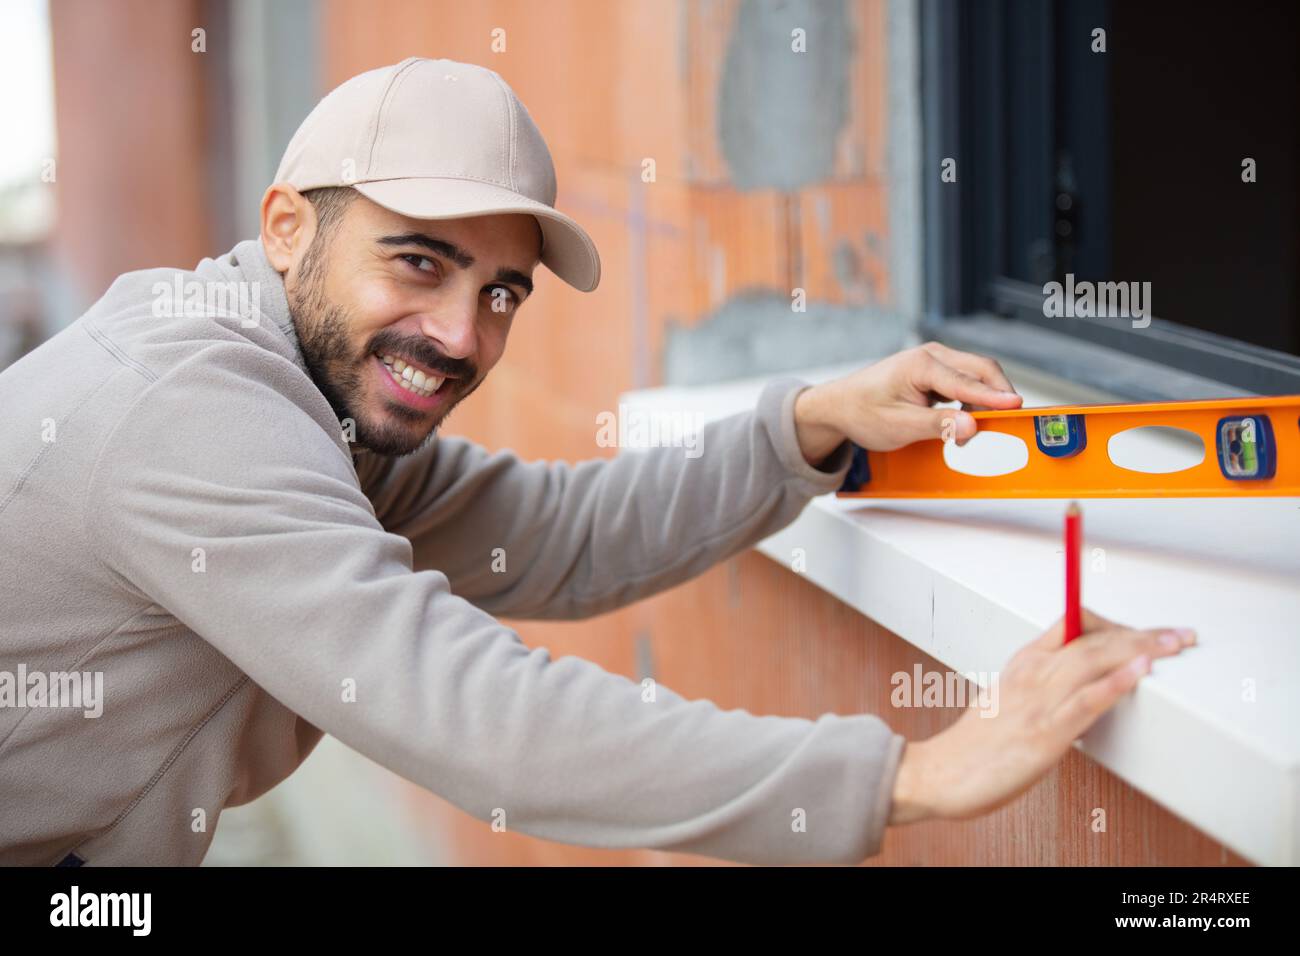 bricklayer checking wall level with spirit level Stock Photo